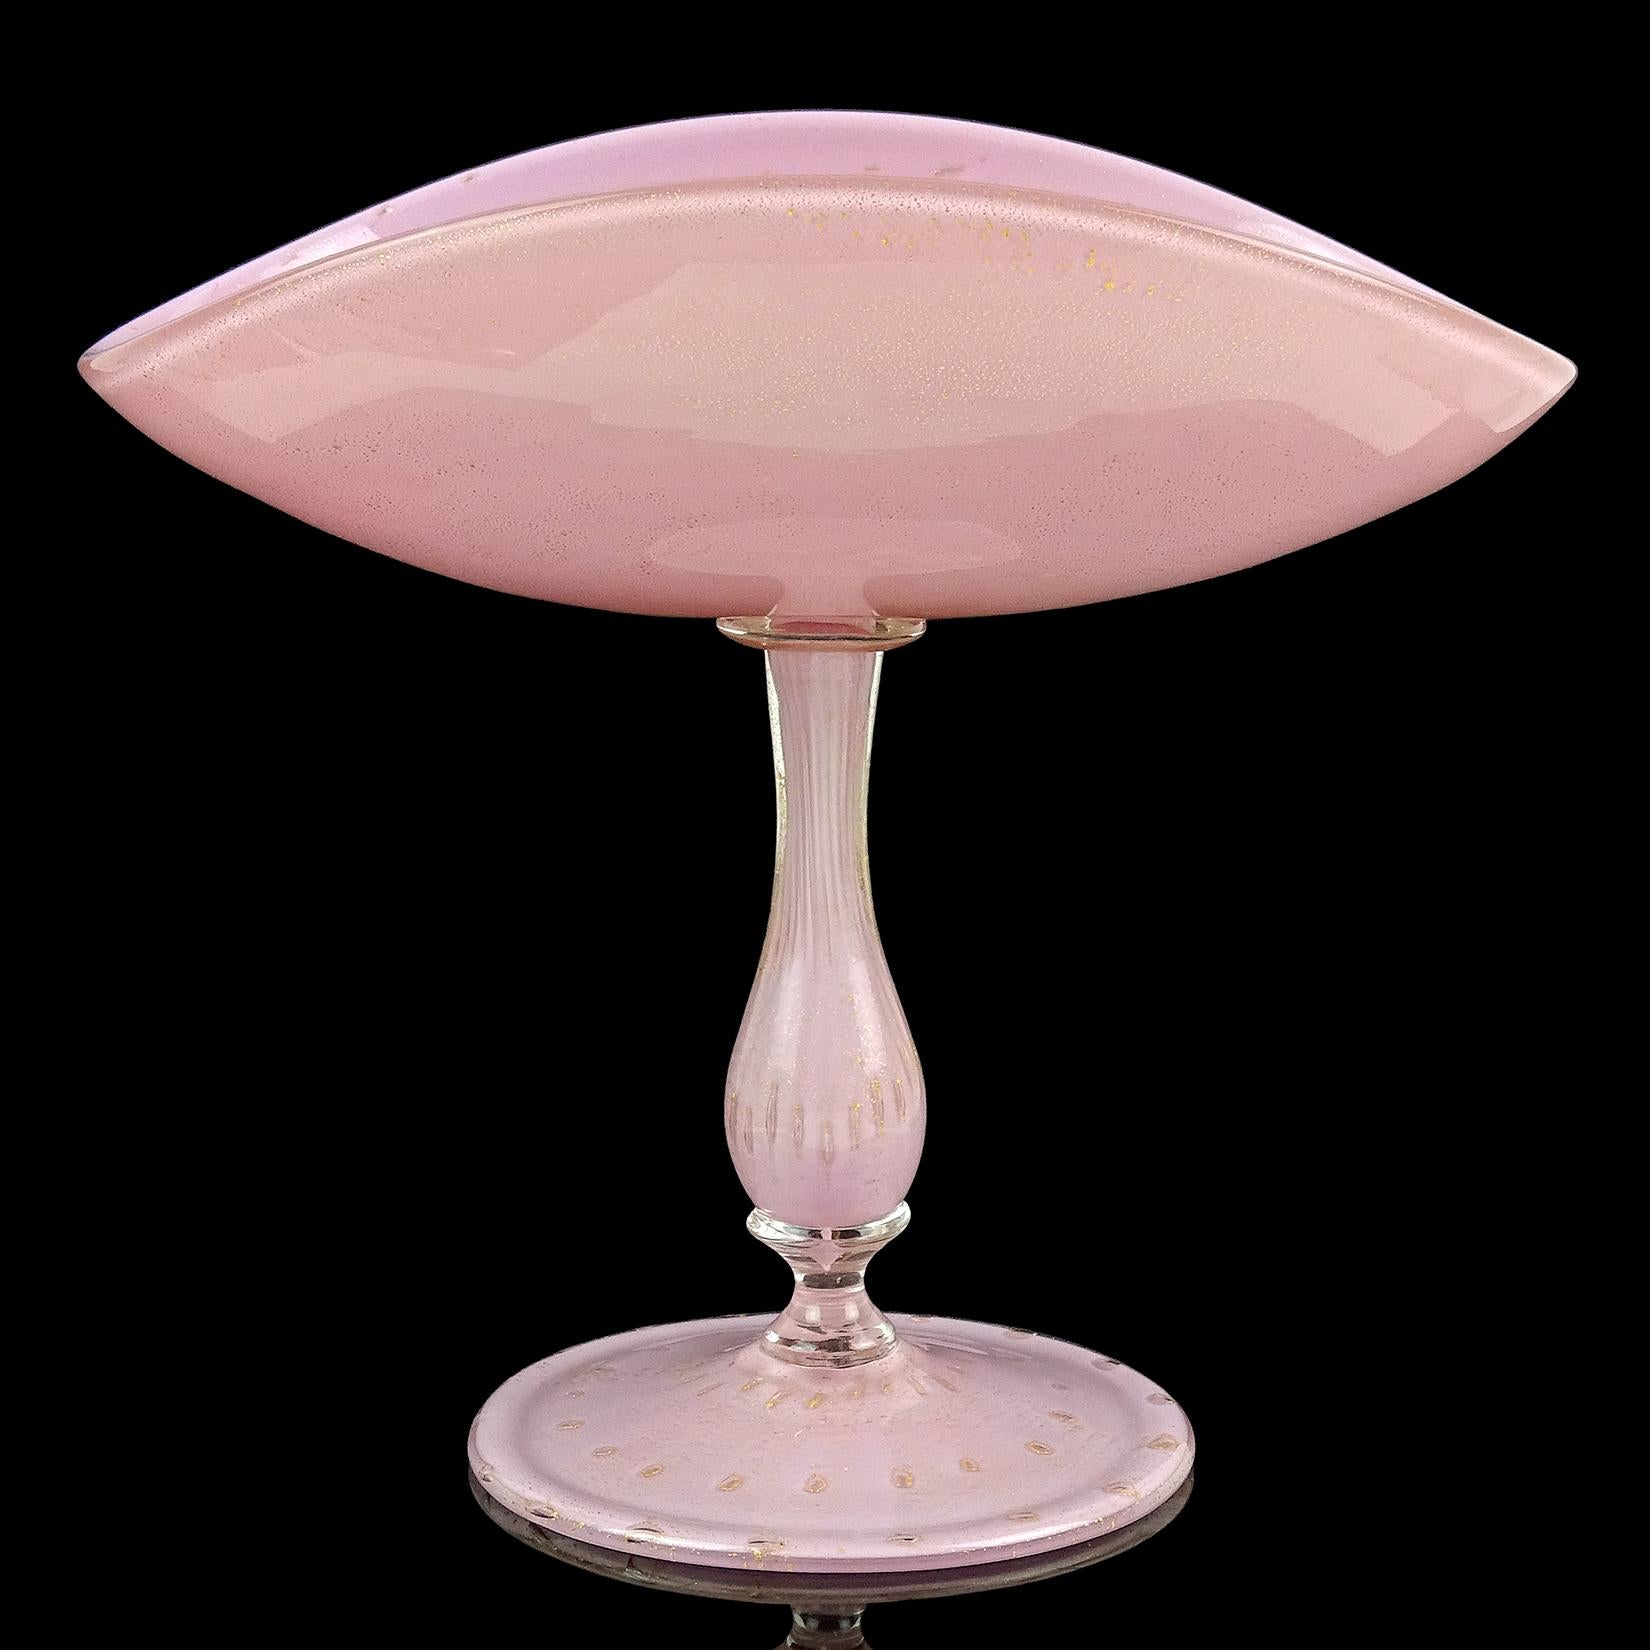 Gorgeous vintage Murano hand blown pink, controlled bubbles and gold flecks Italian art glass pedestal compote bowl. Attributed to designer Alfredo Barbini, circa 1950s. Profusely covered in gold leaf inside and out. Created in the 